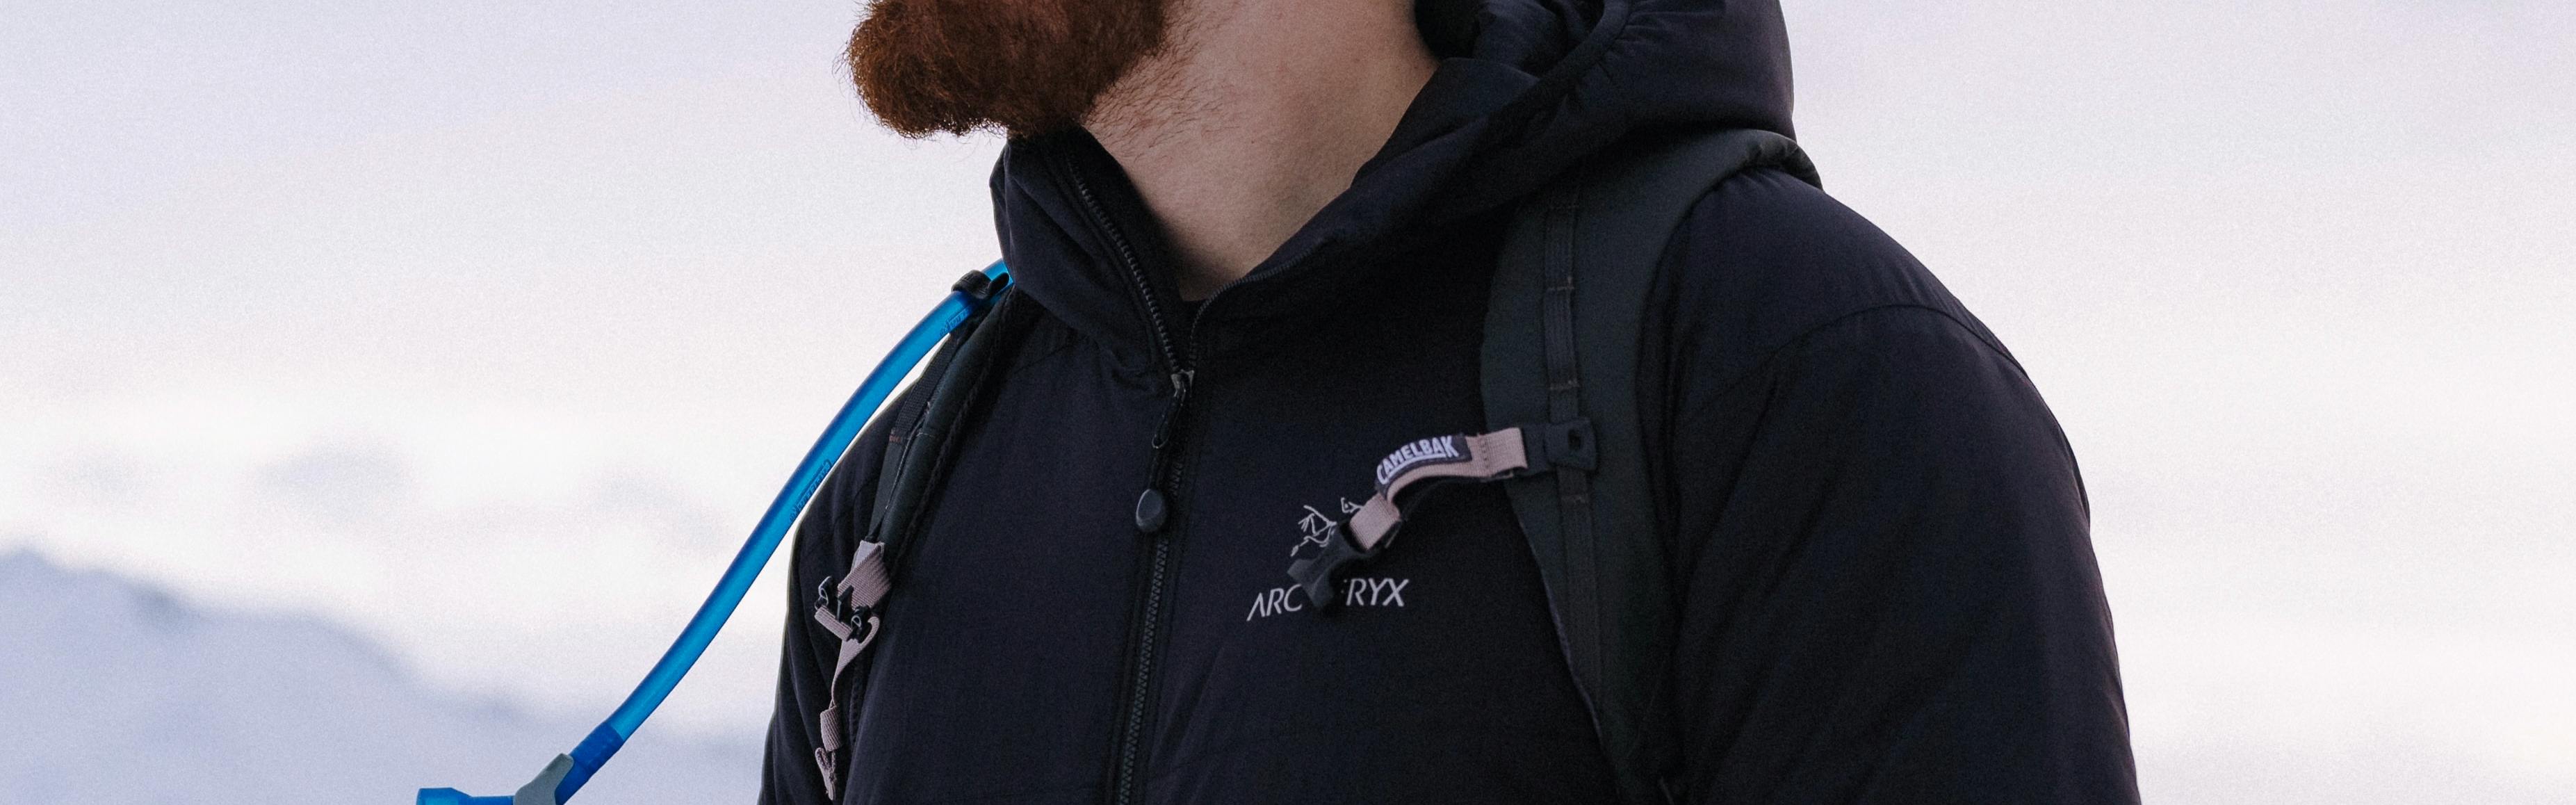 Close up of a man wearing a jacket. Just his chest and beard is visible. He has a backpack on and you can see mountains in the  background.